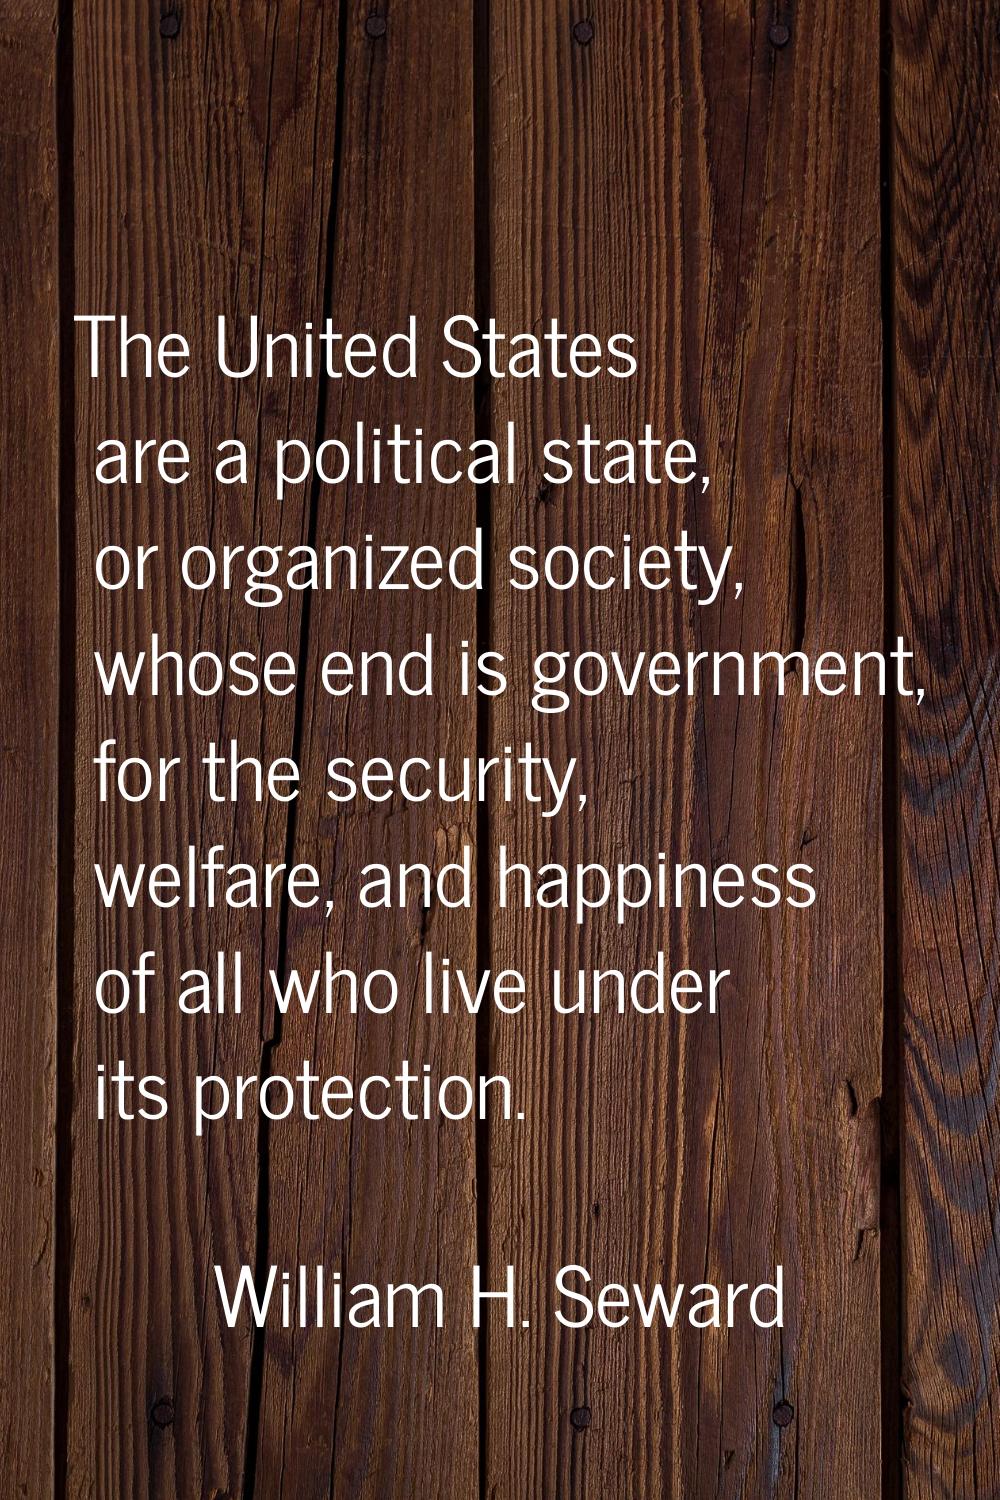 The United States are a political state, or organized society, whose end is government, for the sec